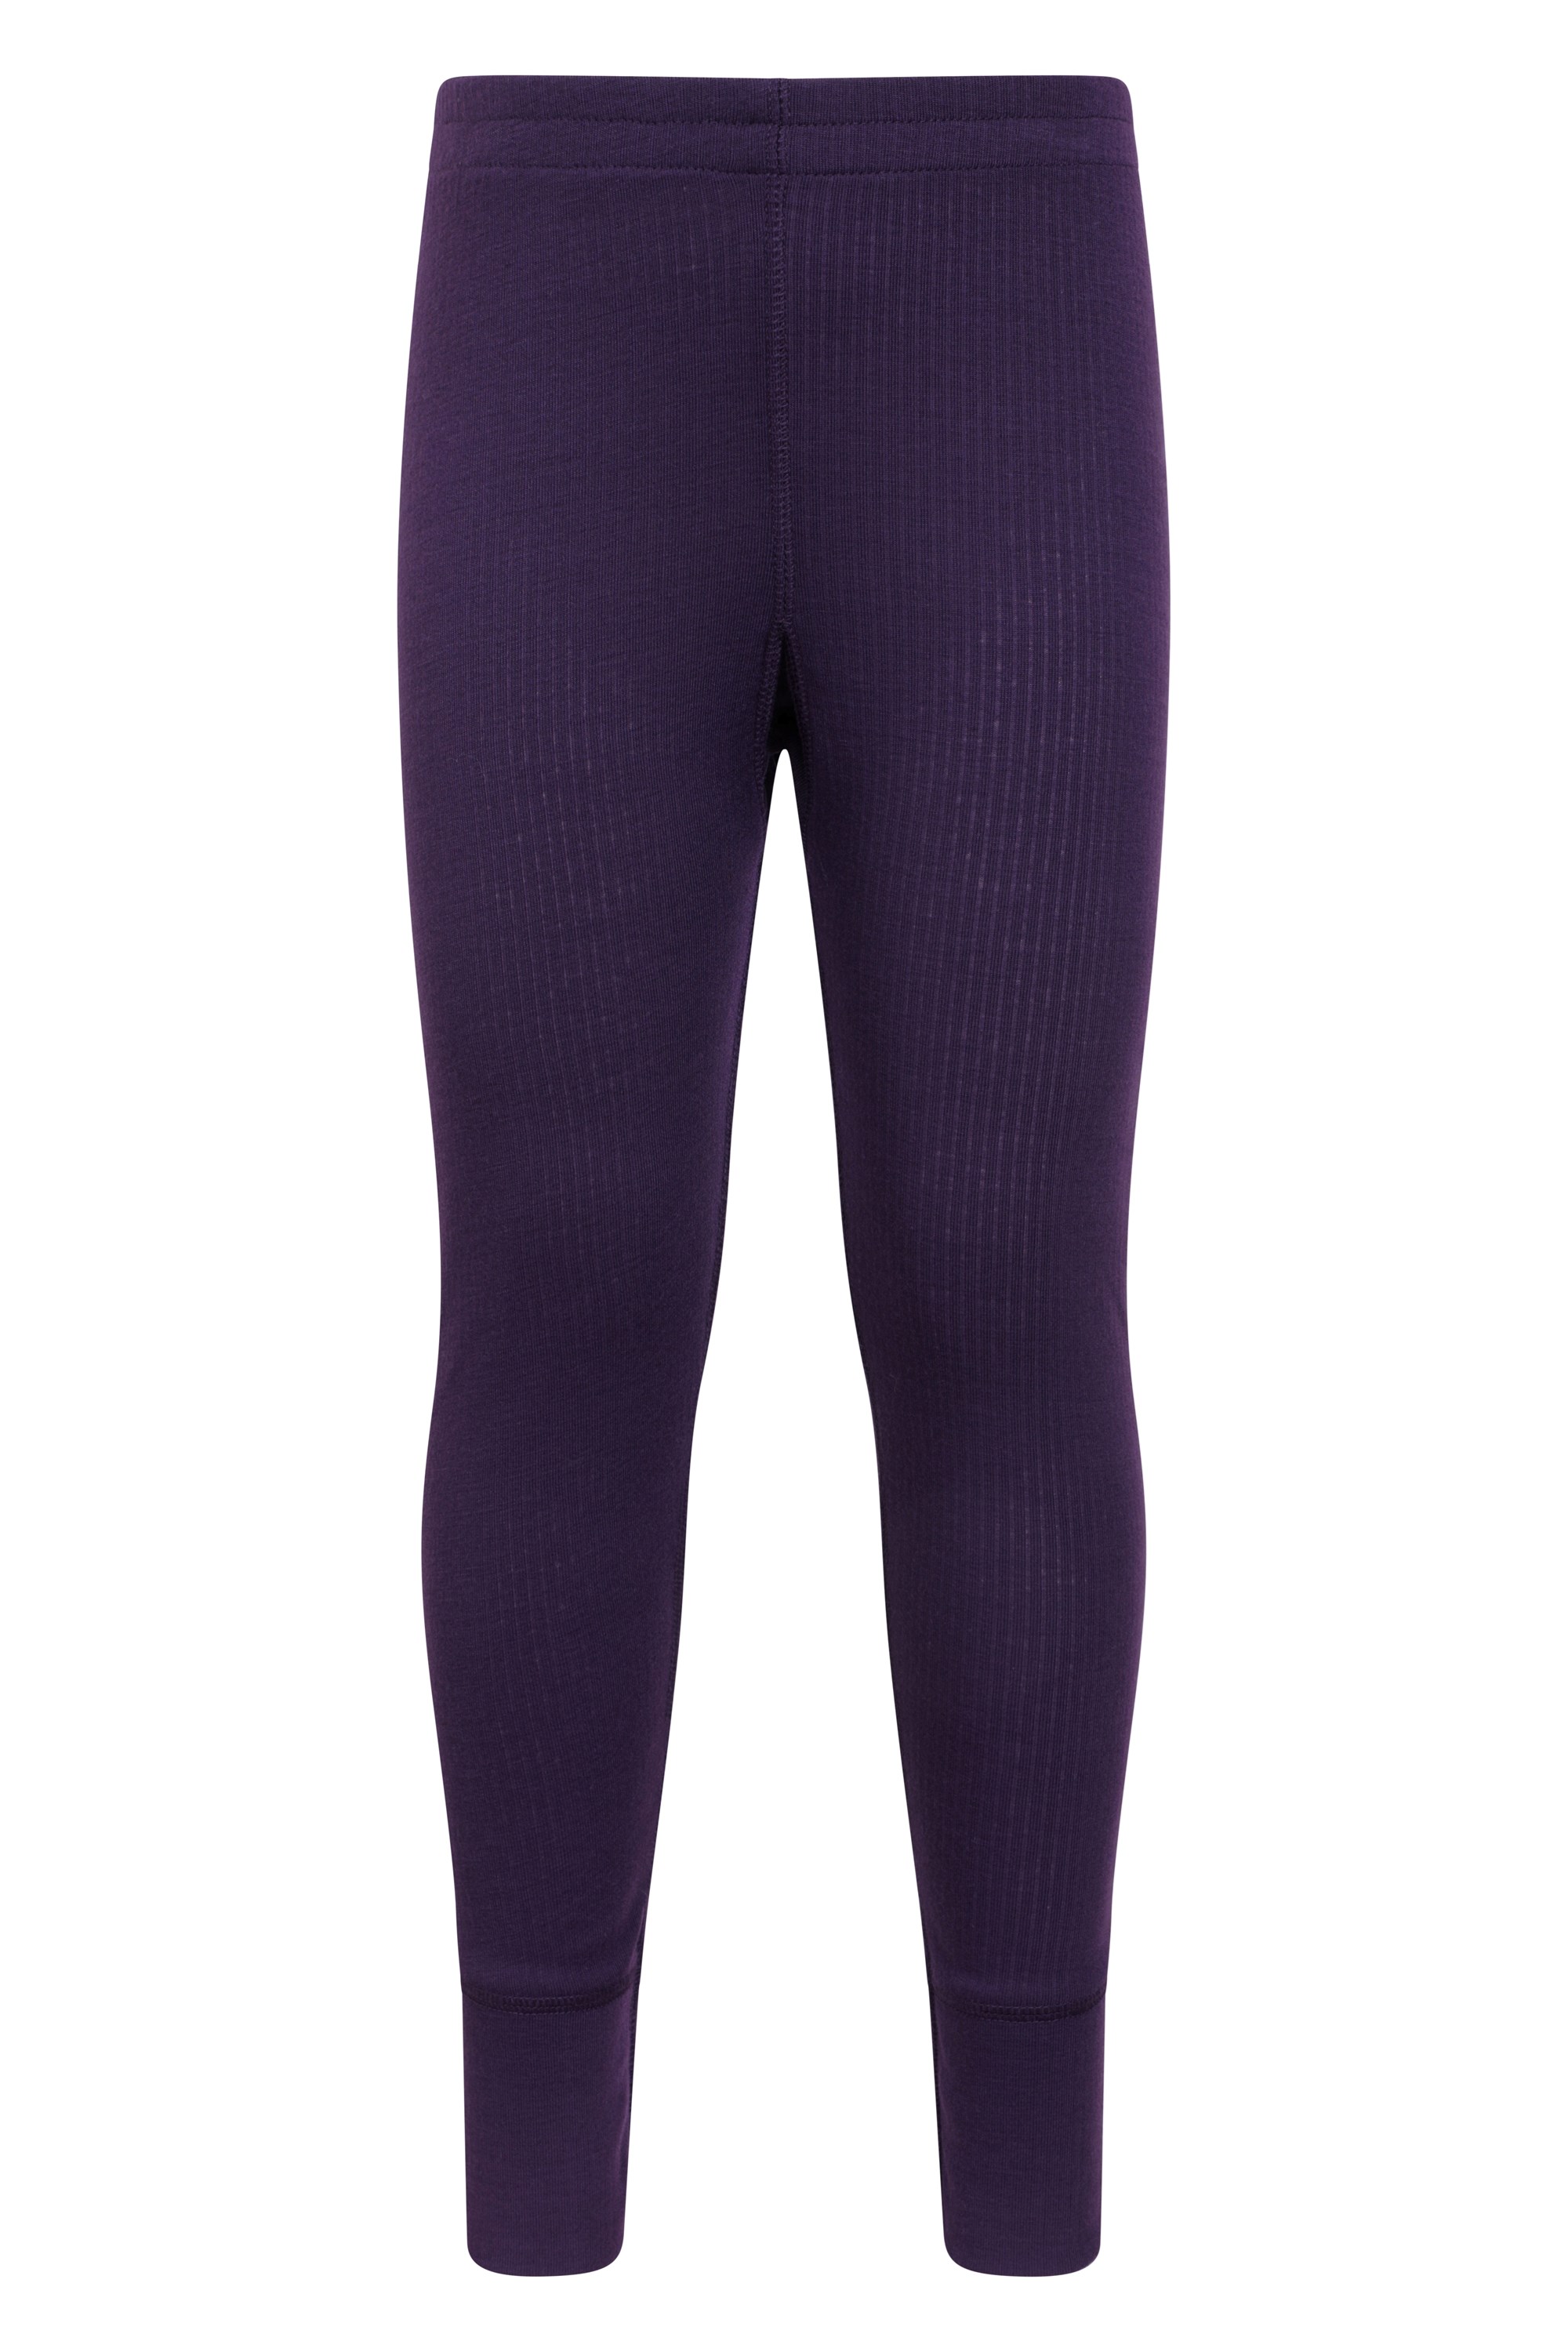 Buy Mountain Warehouse Pink Womens Talus Thermal Leggings from Next Poland